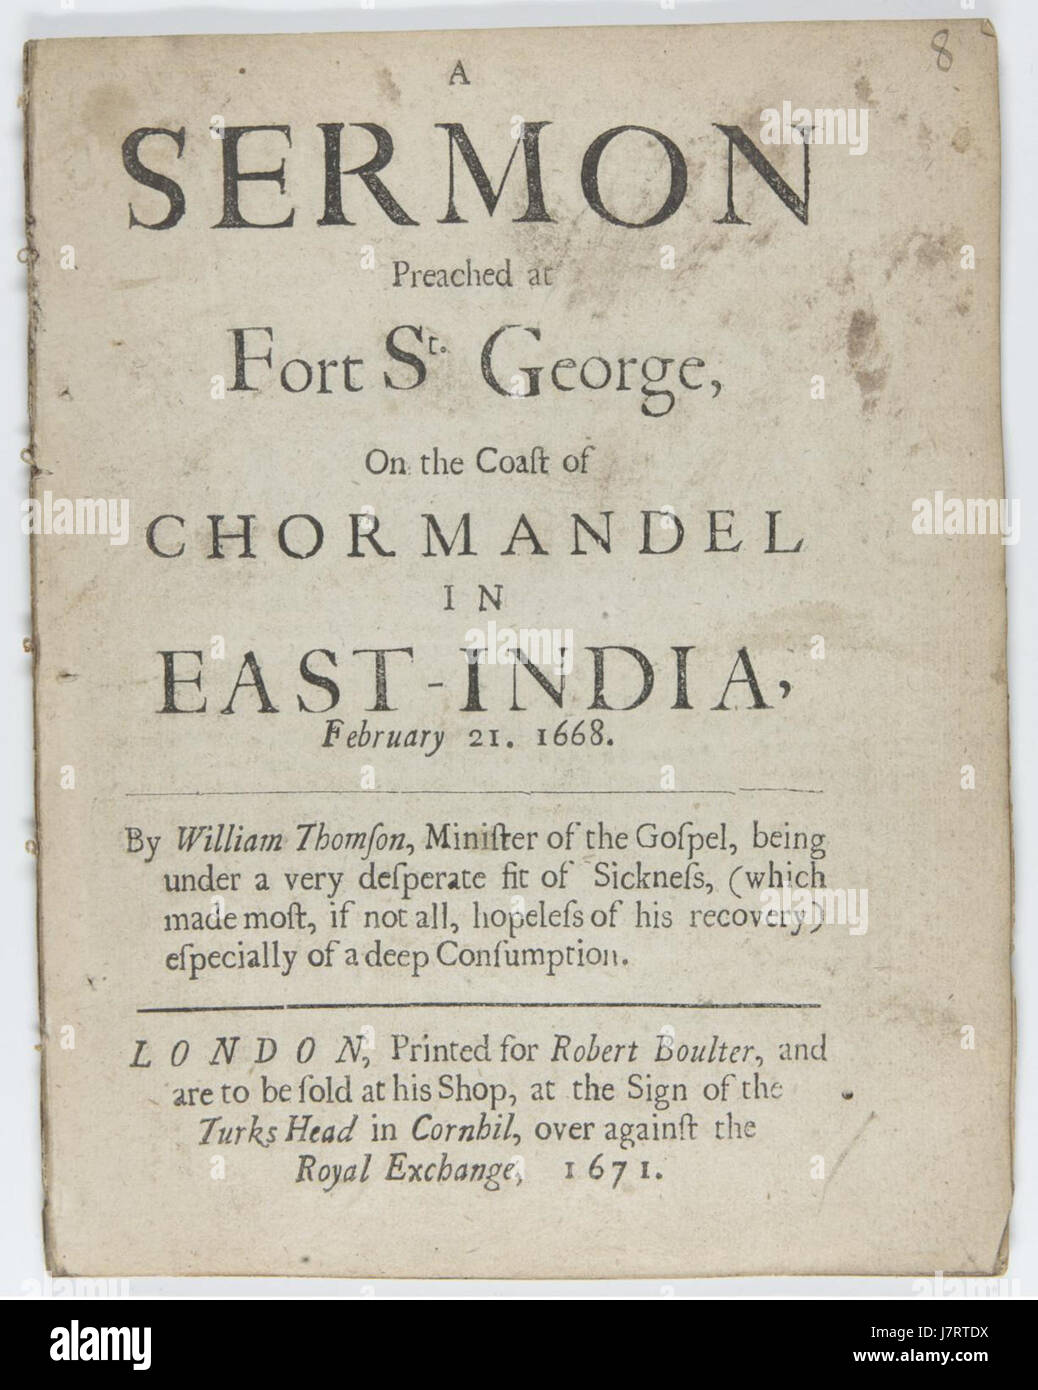 A sermon preached at Fort St. George on the coast of Chormandel in East India, February 21 1668 Stock Photo